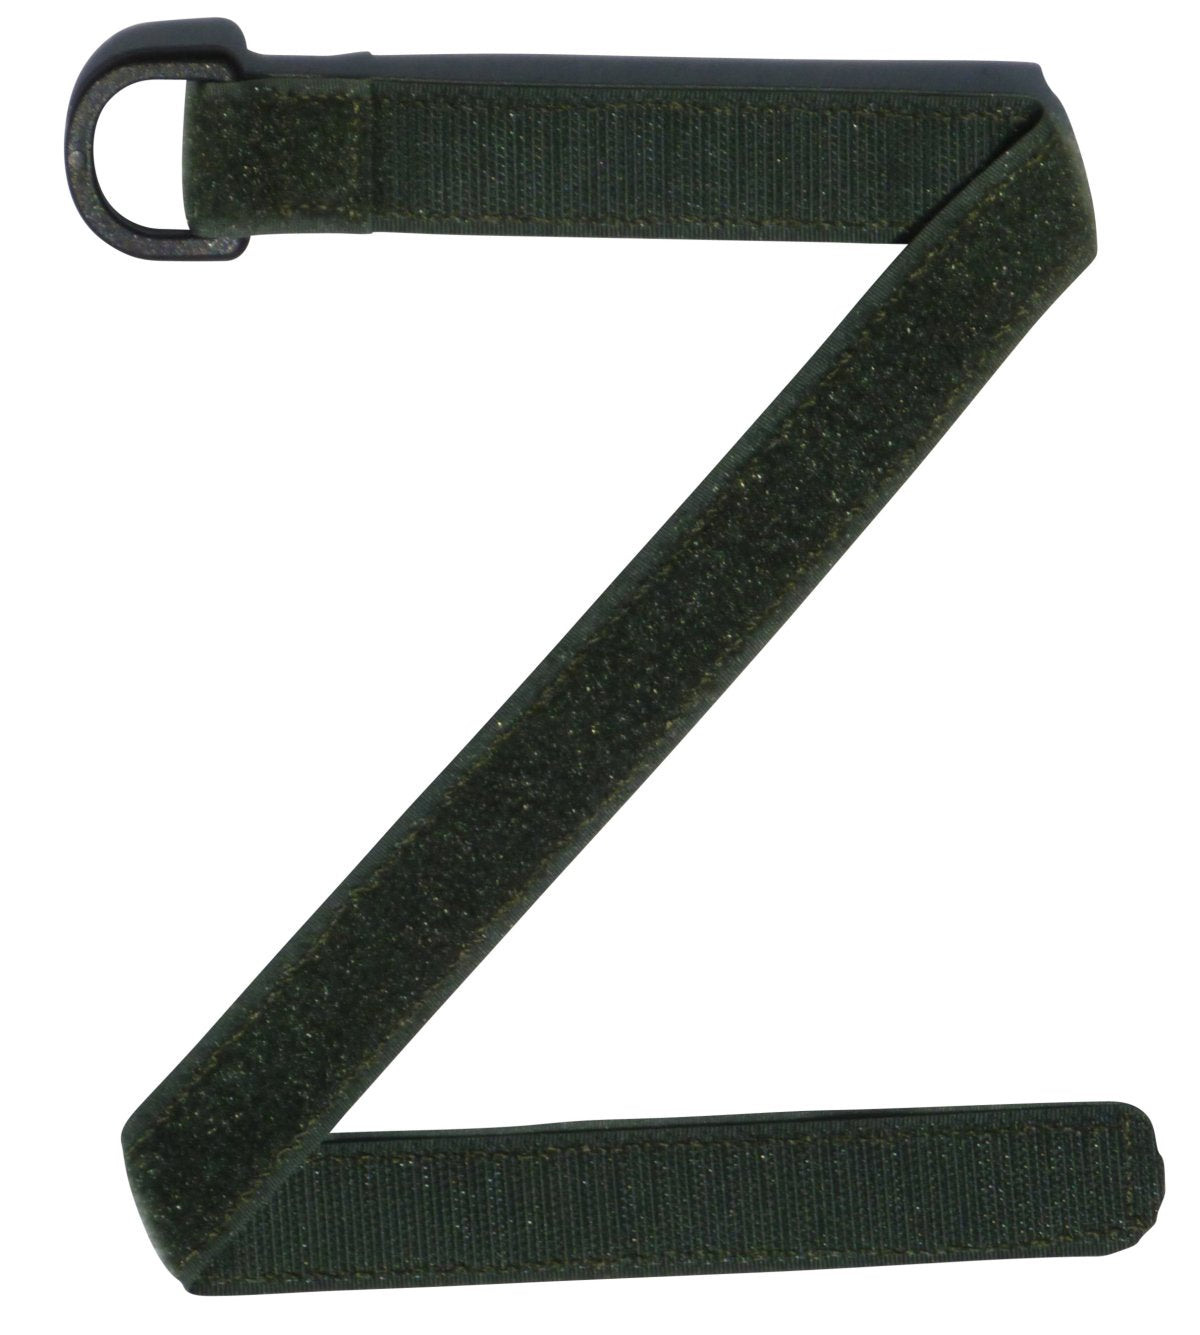 Benristraps 25mm back to back hook & loop strap in green with D ring (pair)